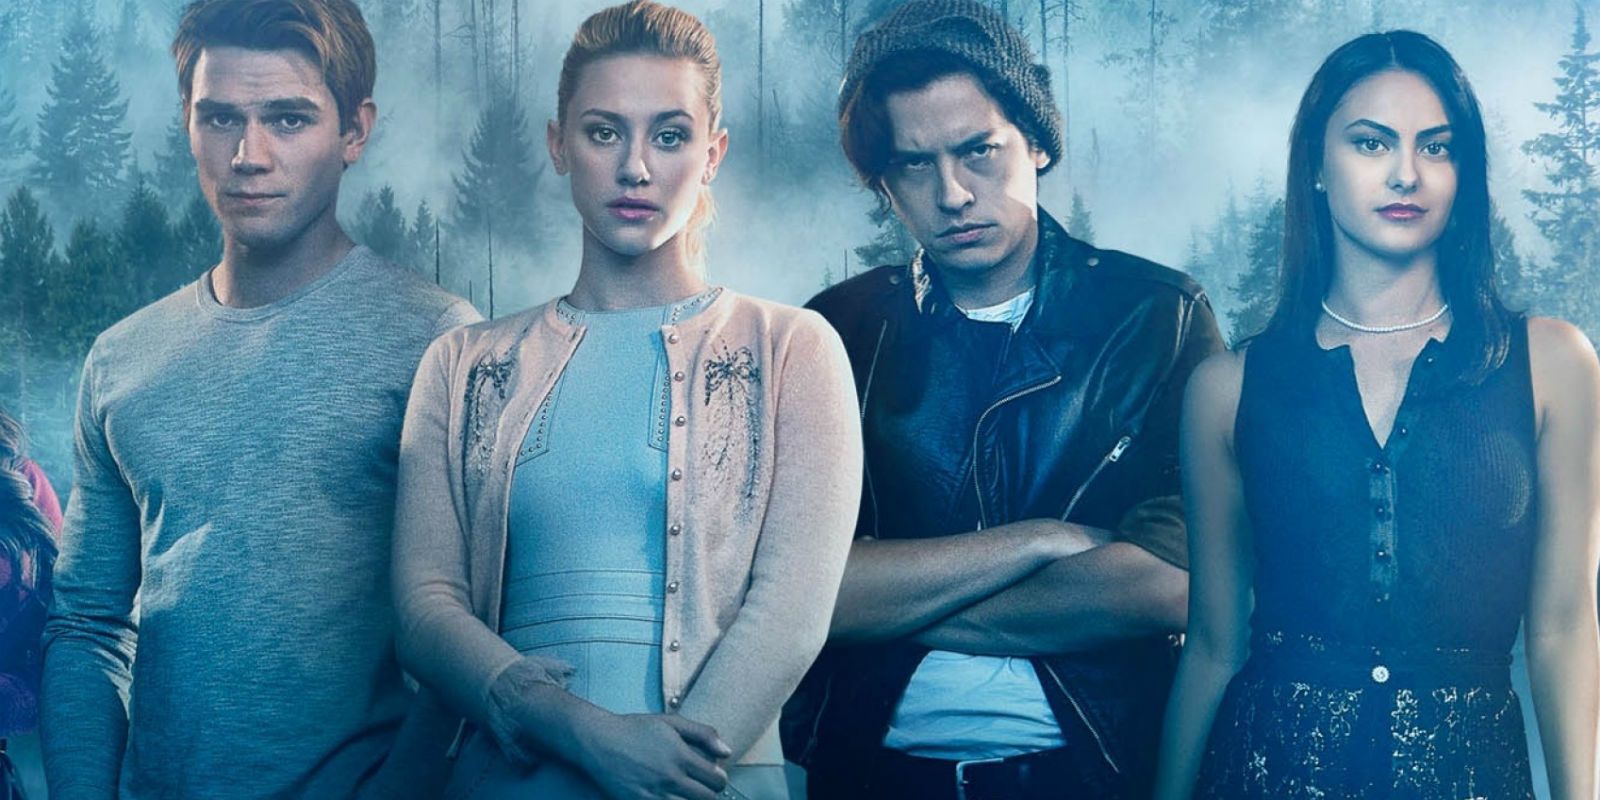 No New RIVERDALE Episode This Week - Here's When It Returns